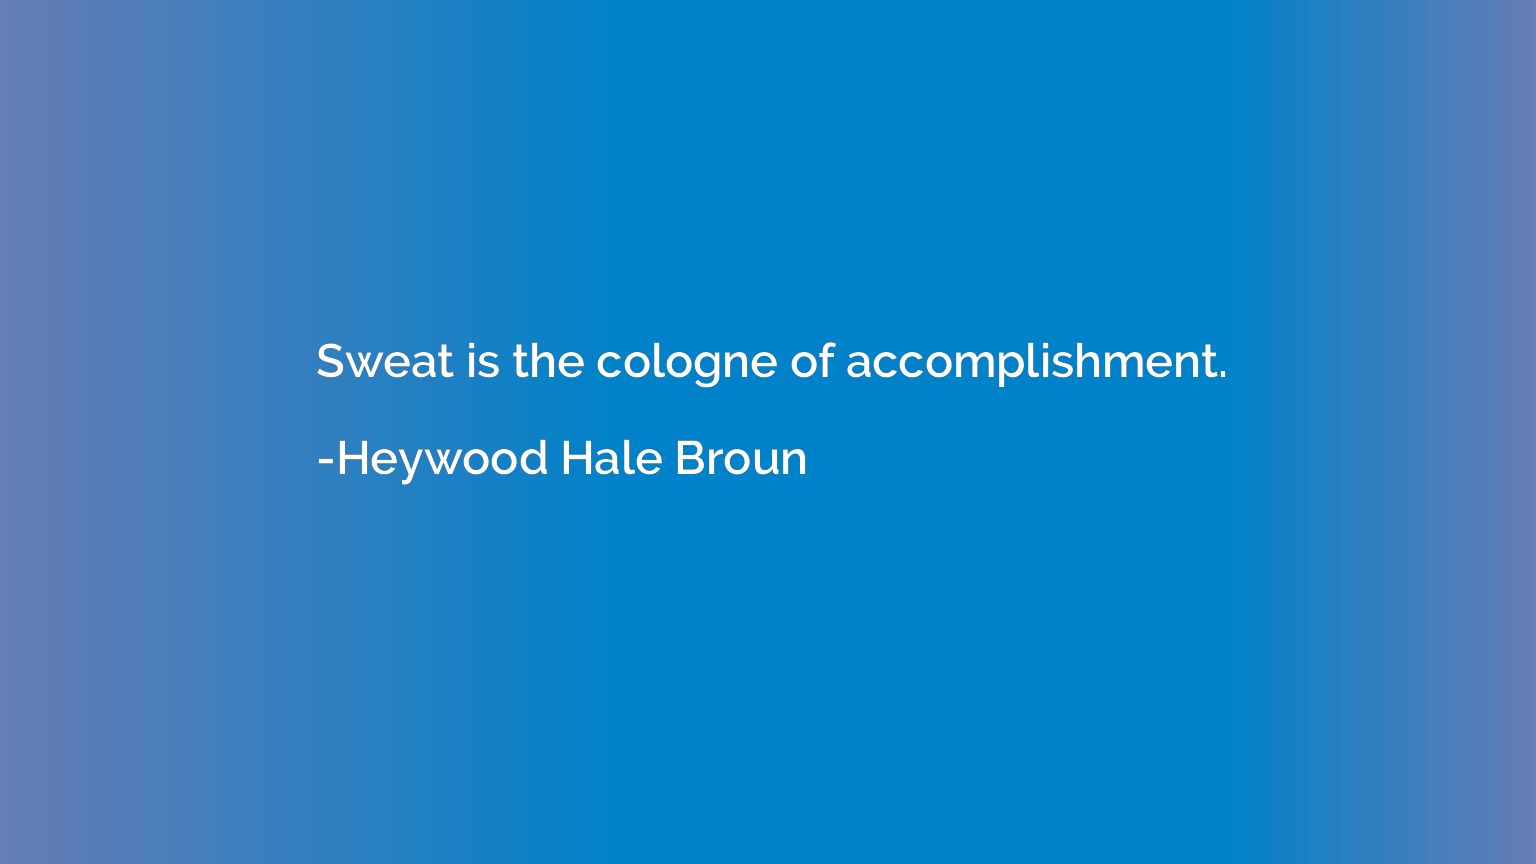 Sweat is the cologne of accomplishment.